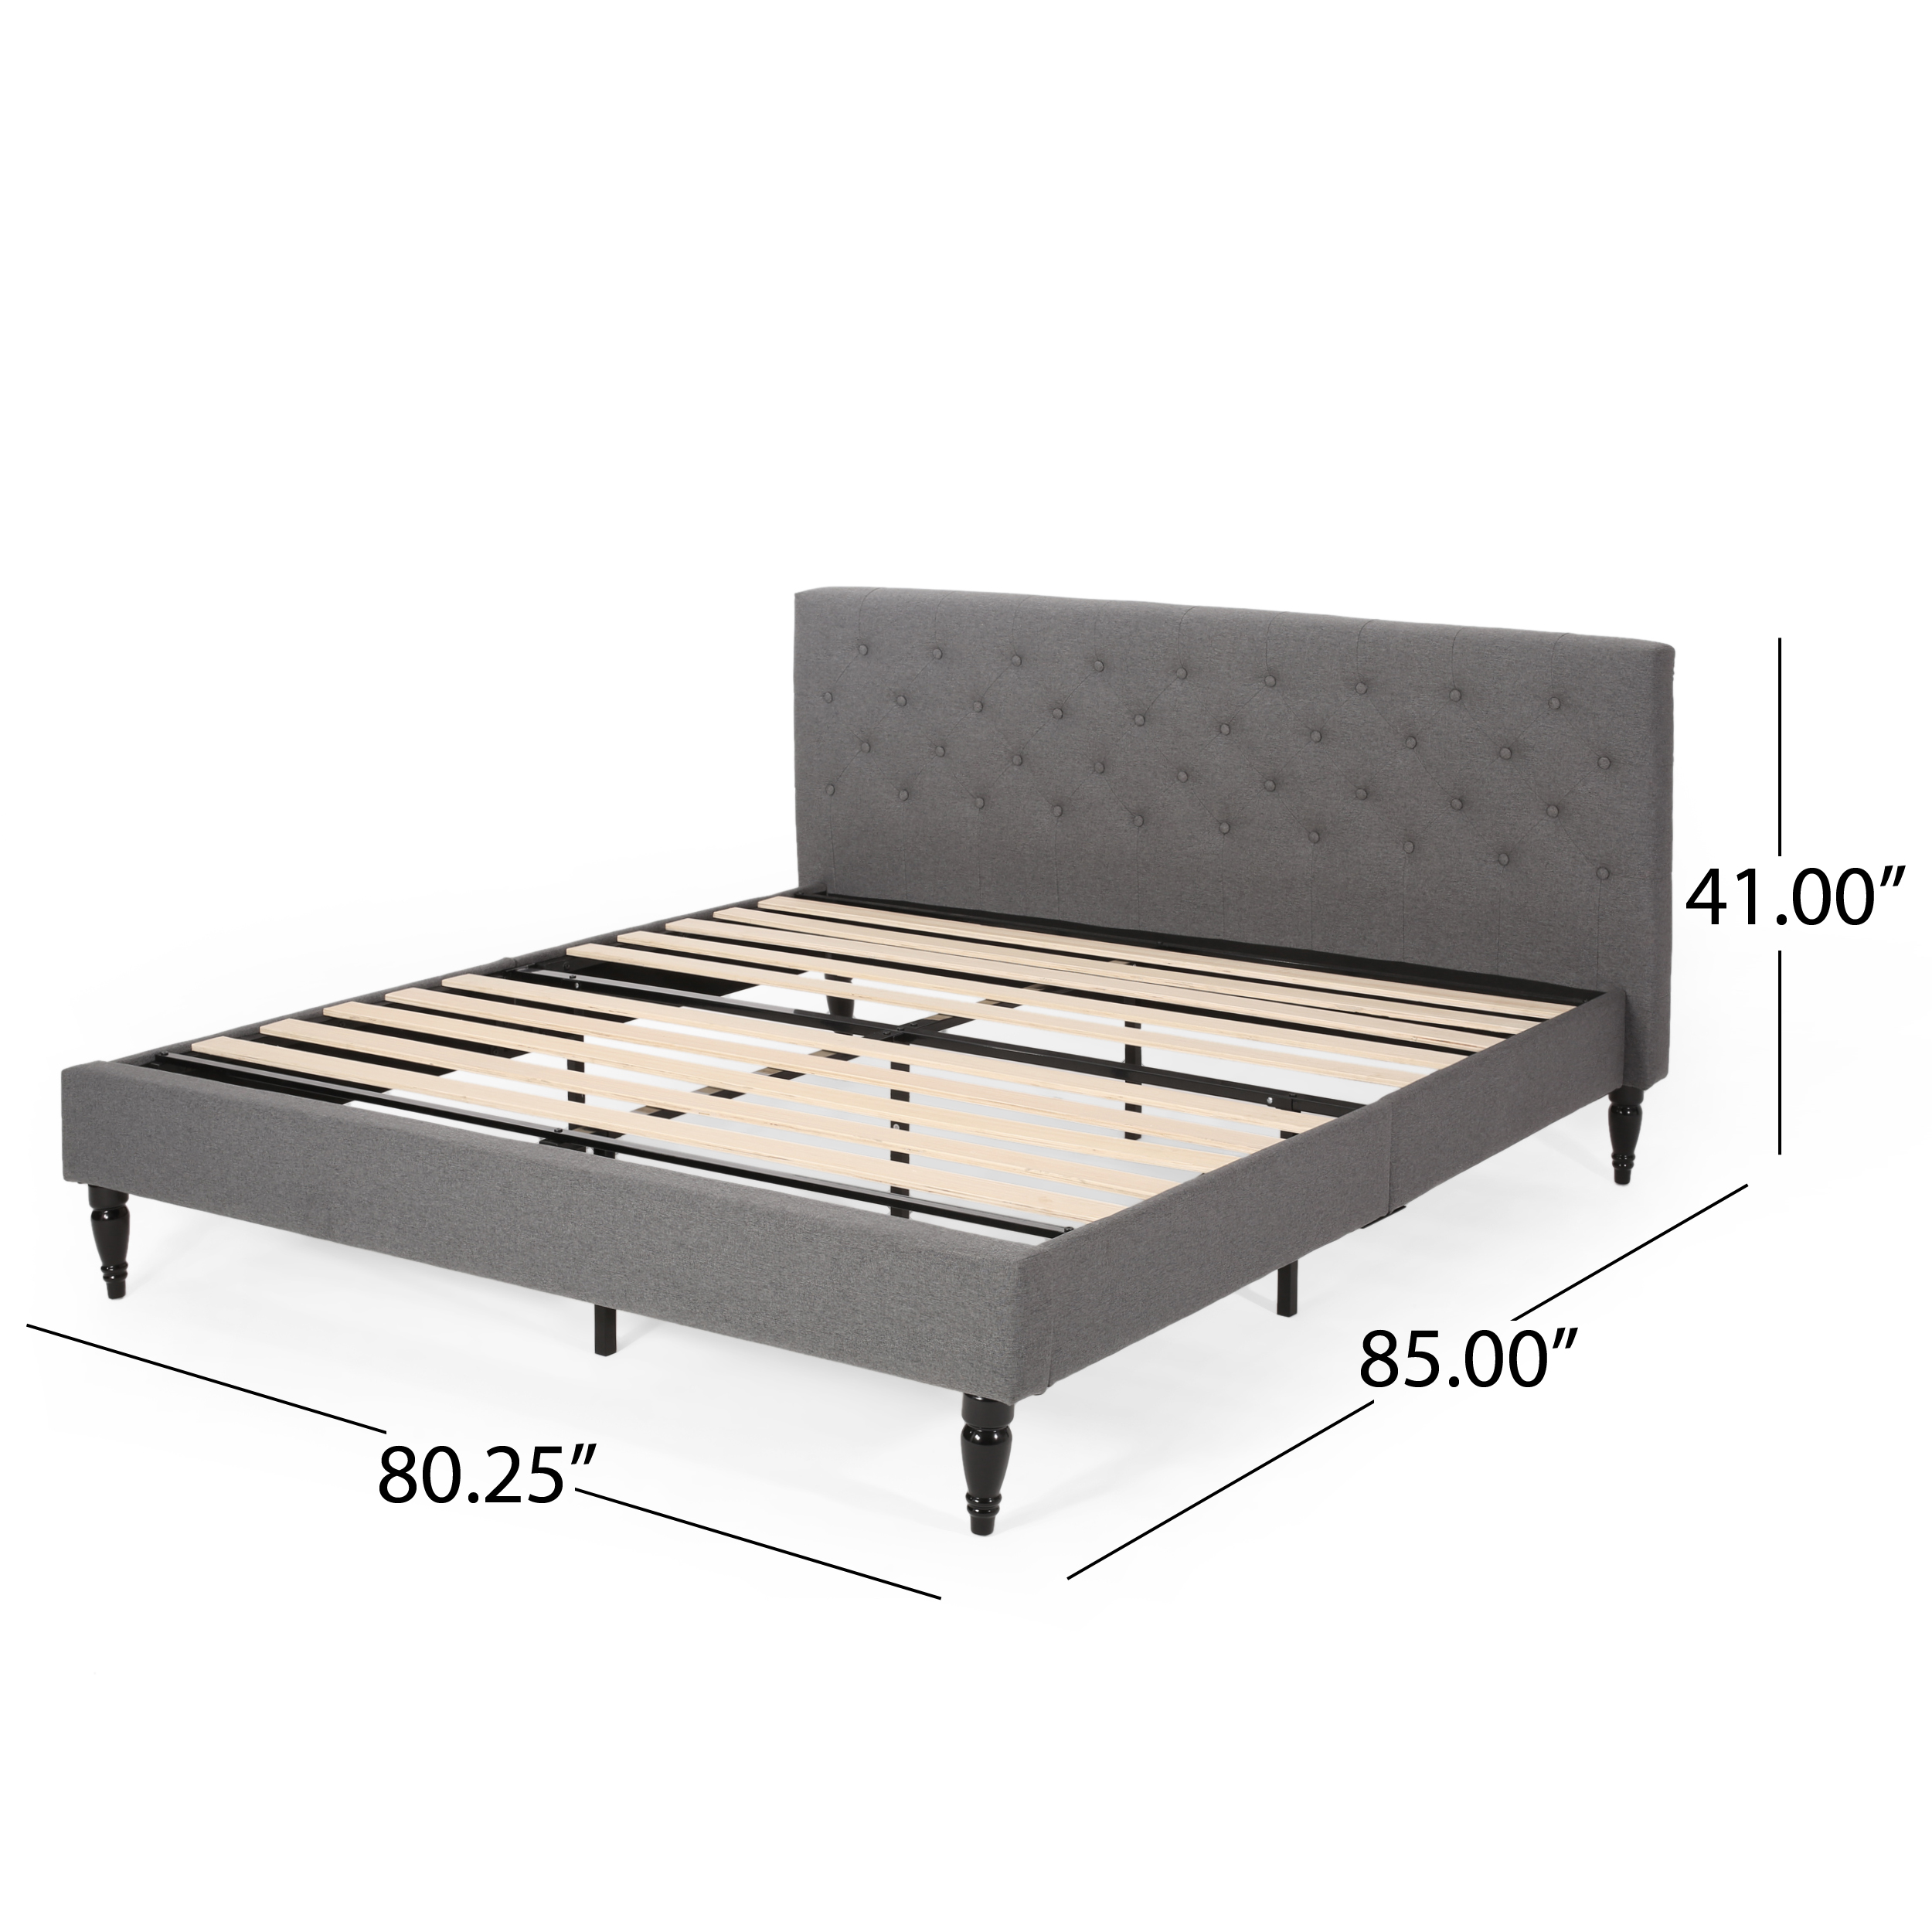 GDF Studio Vallarta Contemporary Fabric Upholstered Tufted Bed, Charcoal Gray and Black King - image 5 of 13